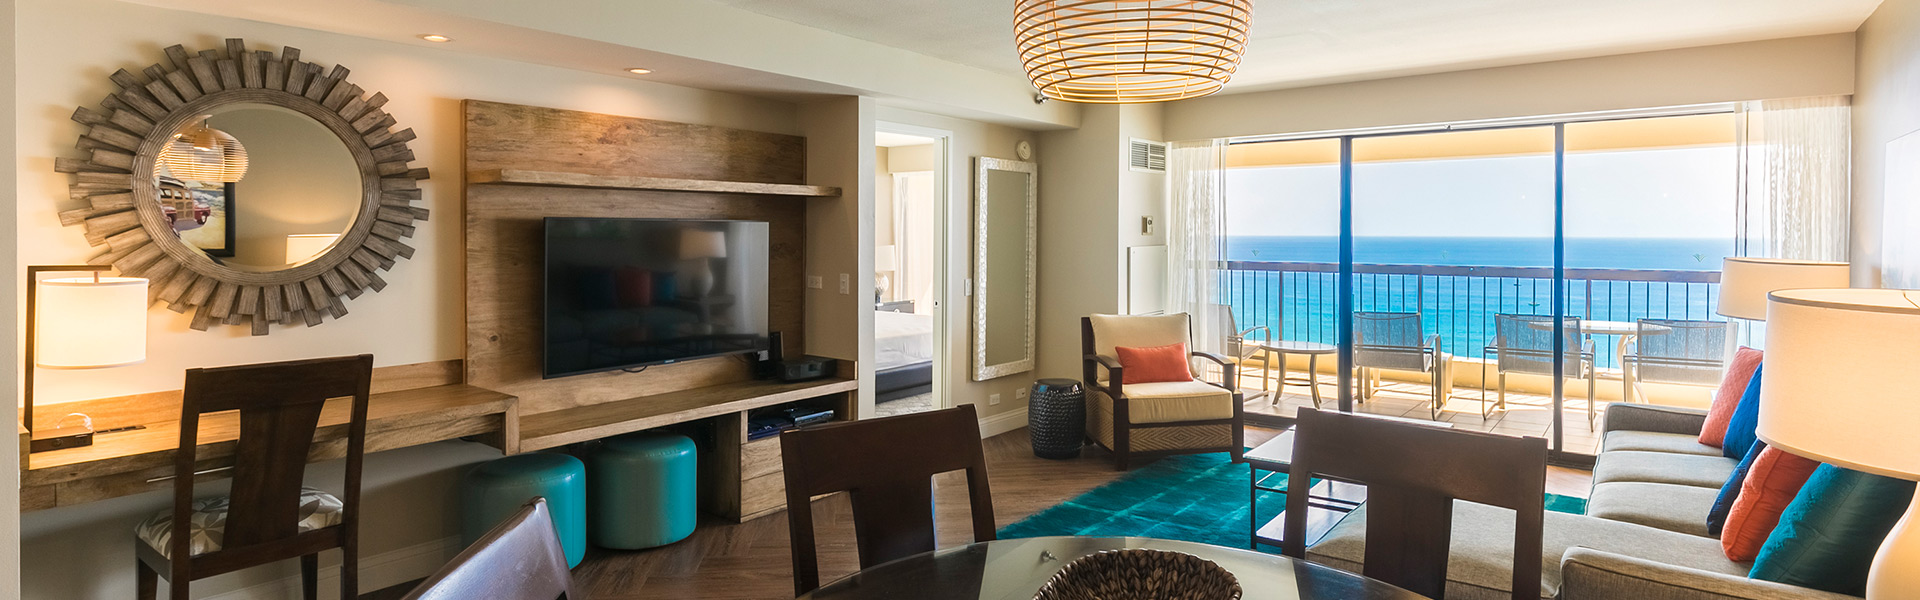 Guest suite living area with seating, TV, and balcony with view of ocean